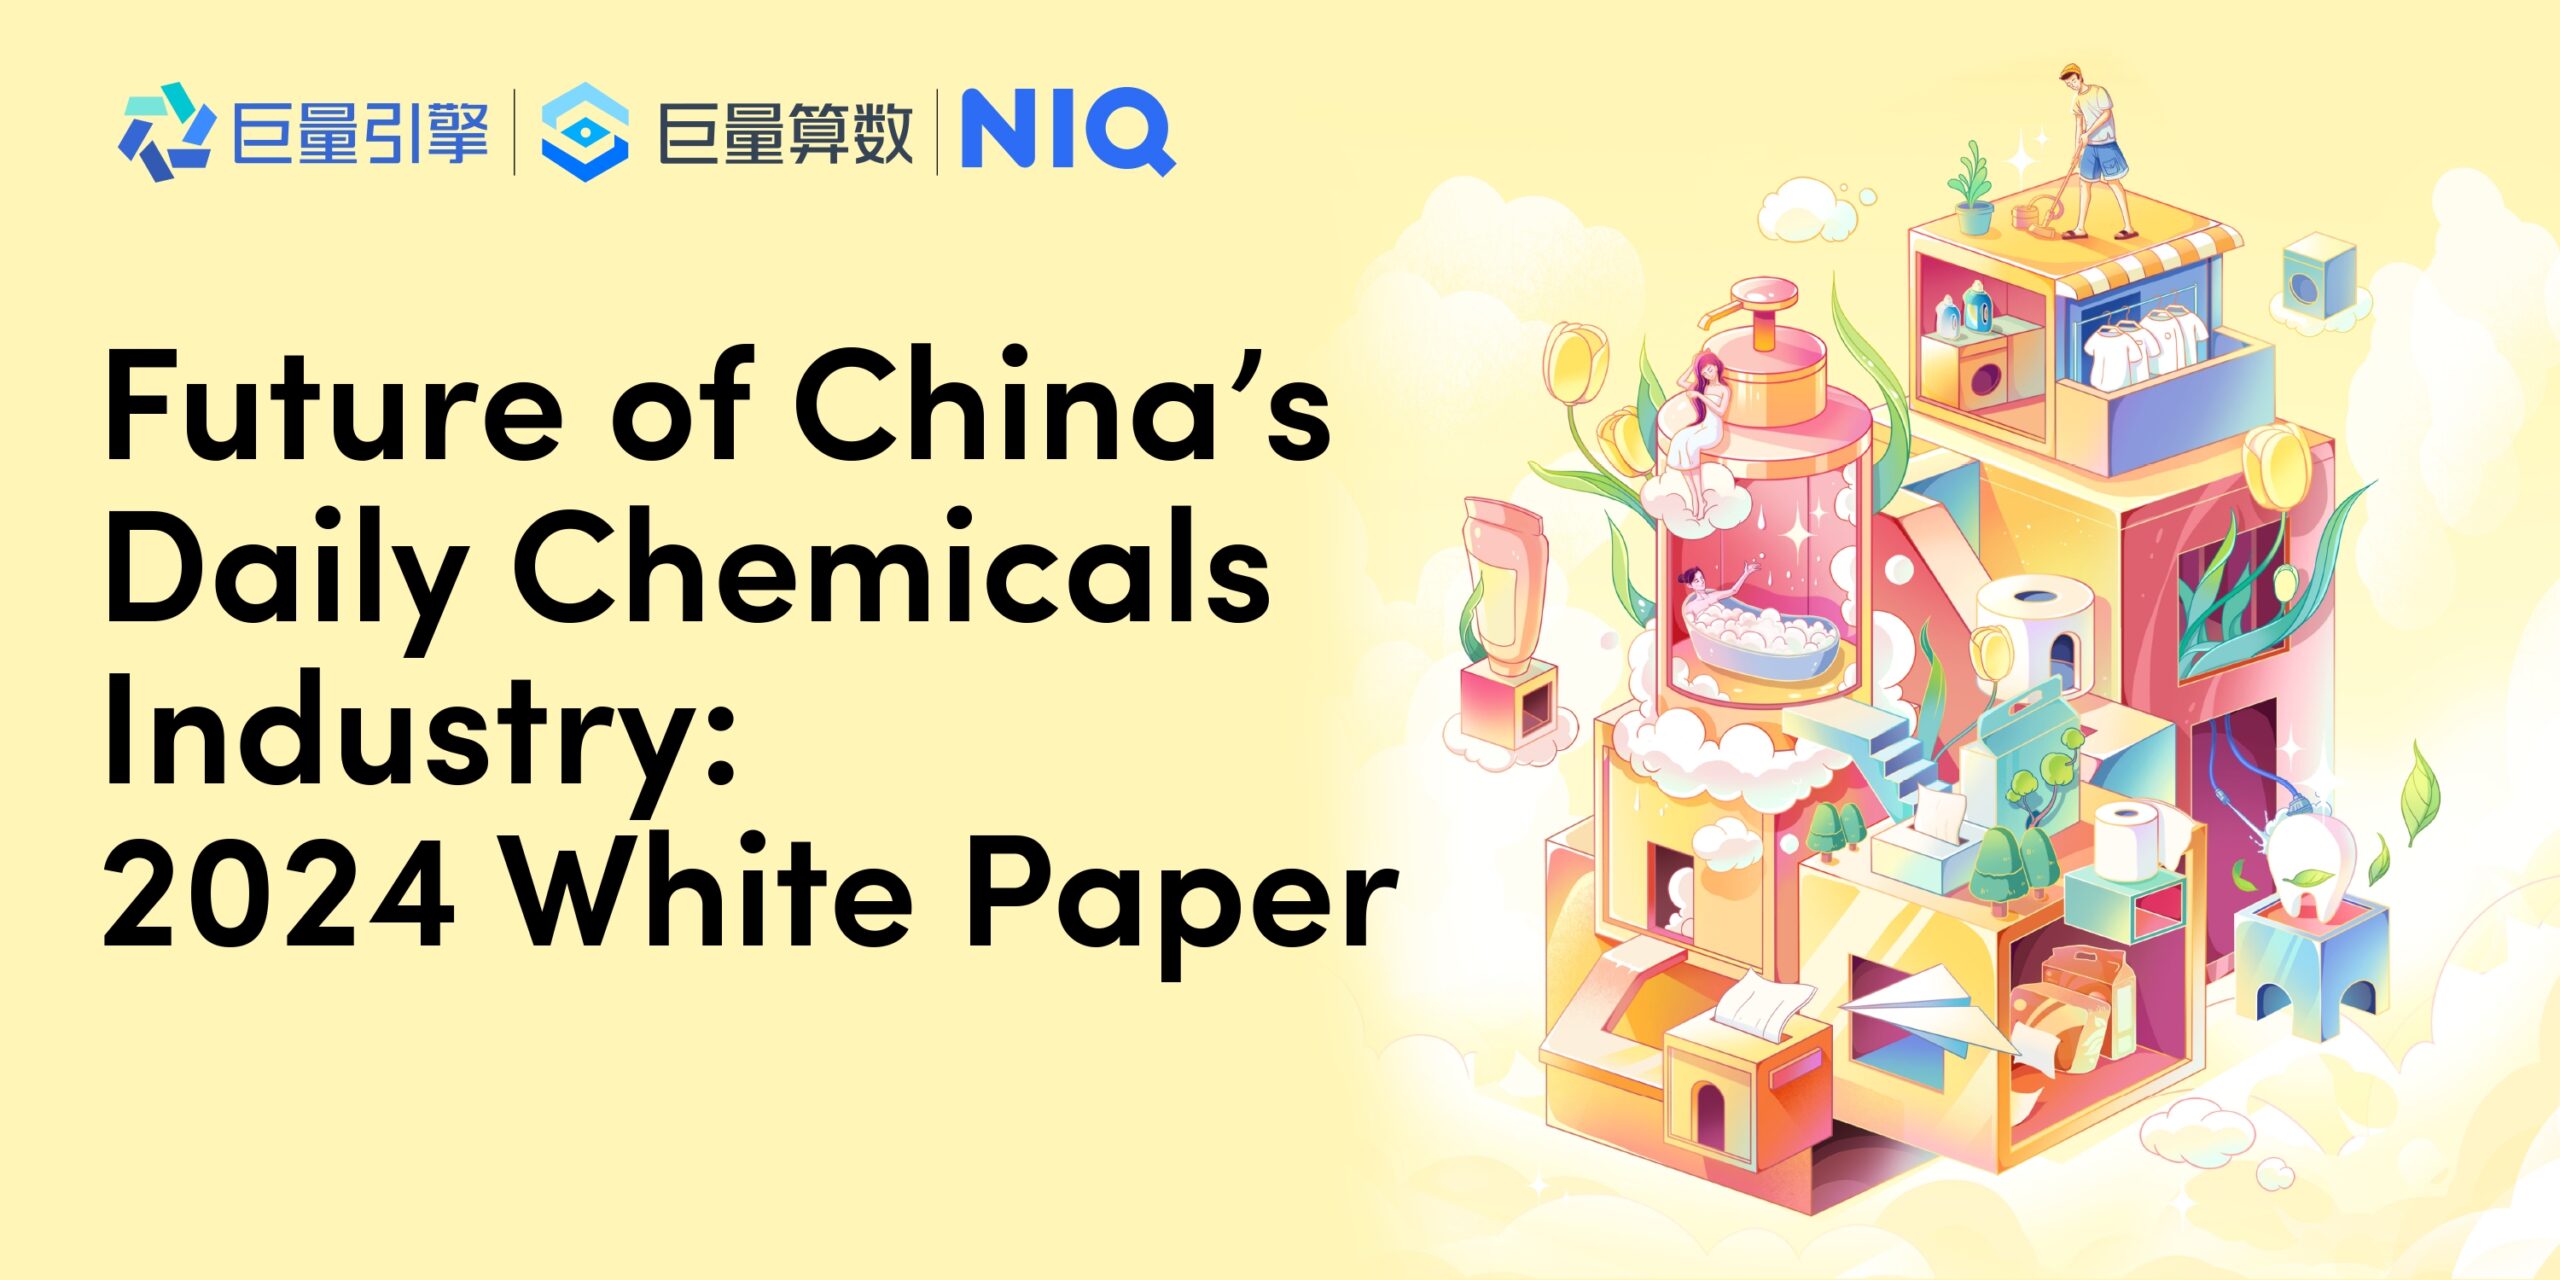 Future of China’s Daily Chemicals Industry: 2024 White Paper